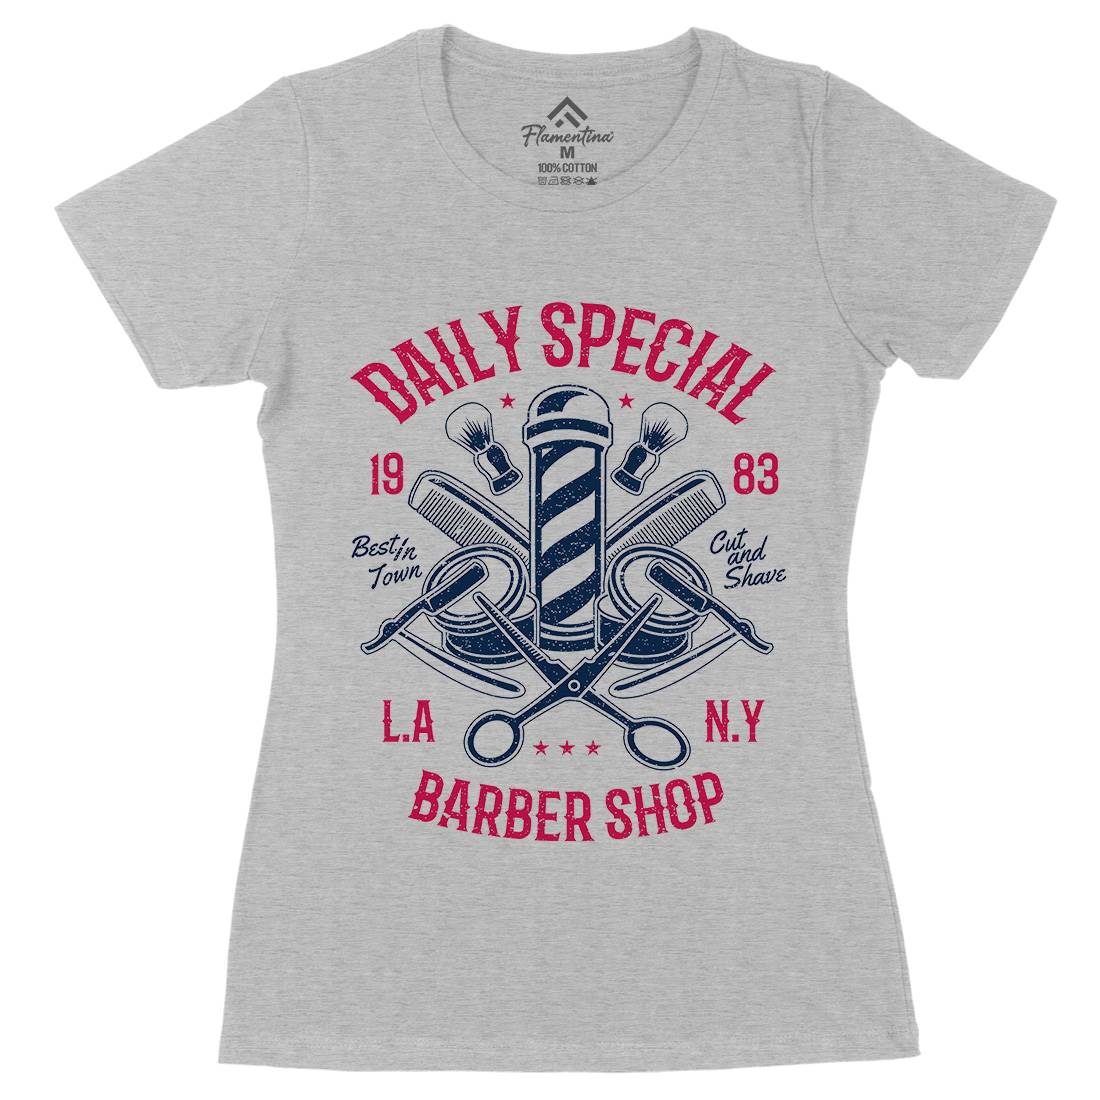 Daily Special Shop Womens Organic Crew Neck T-Shirt Barber A041